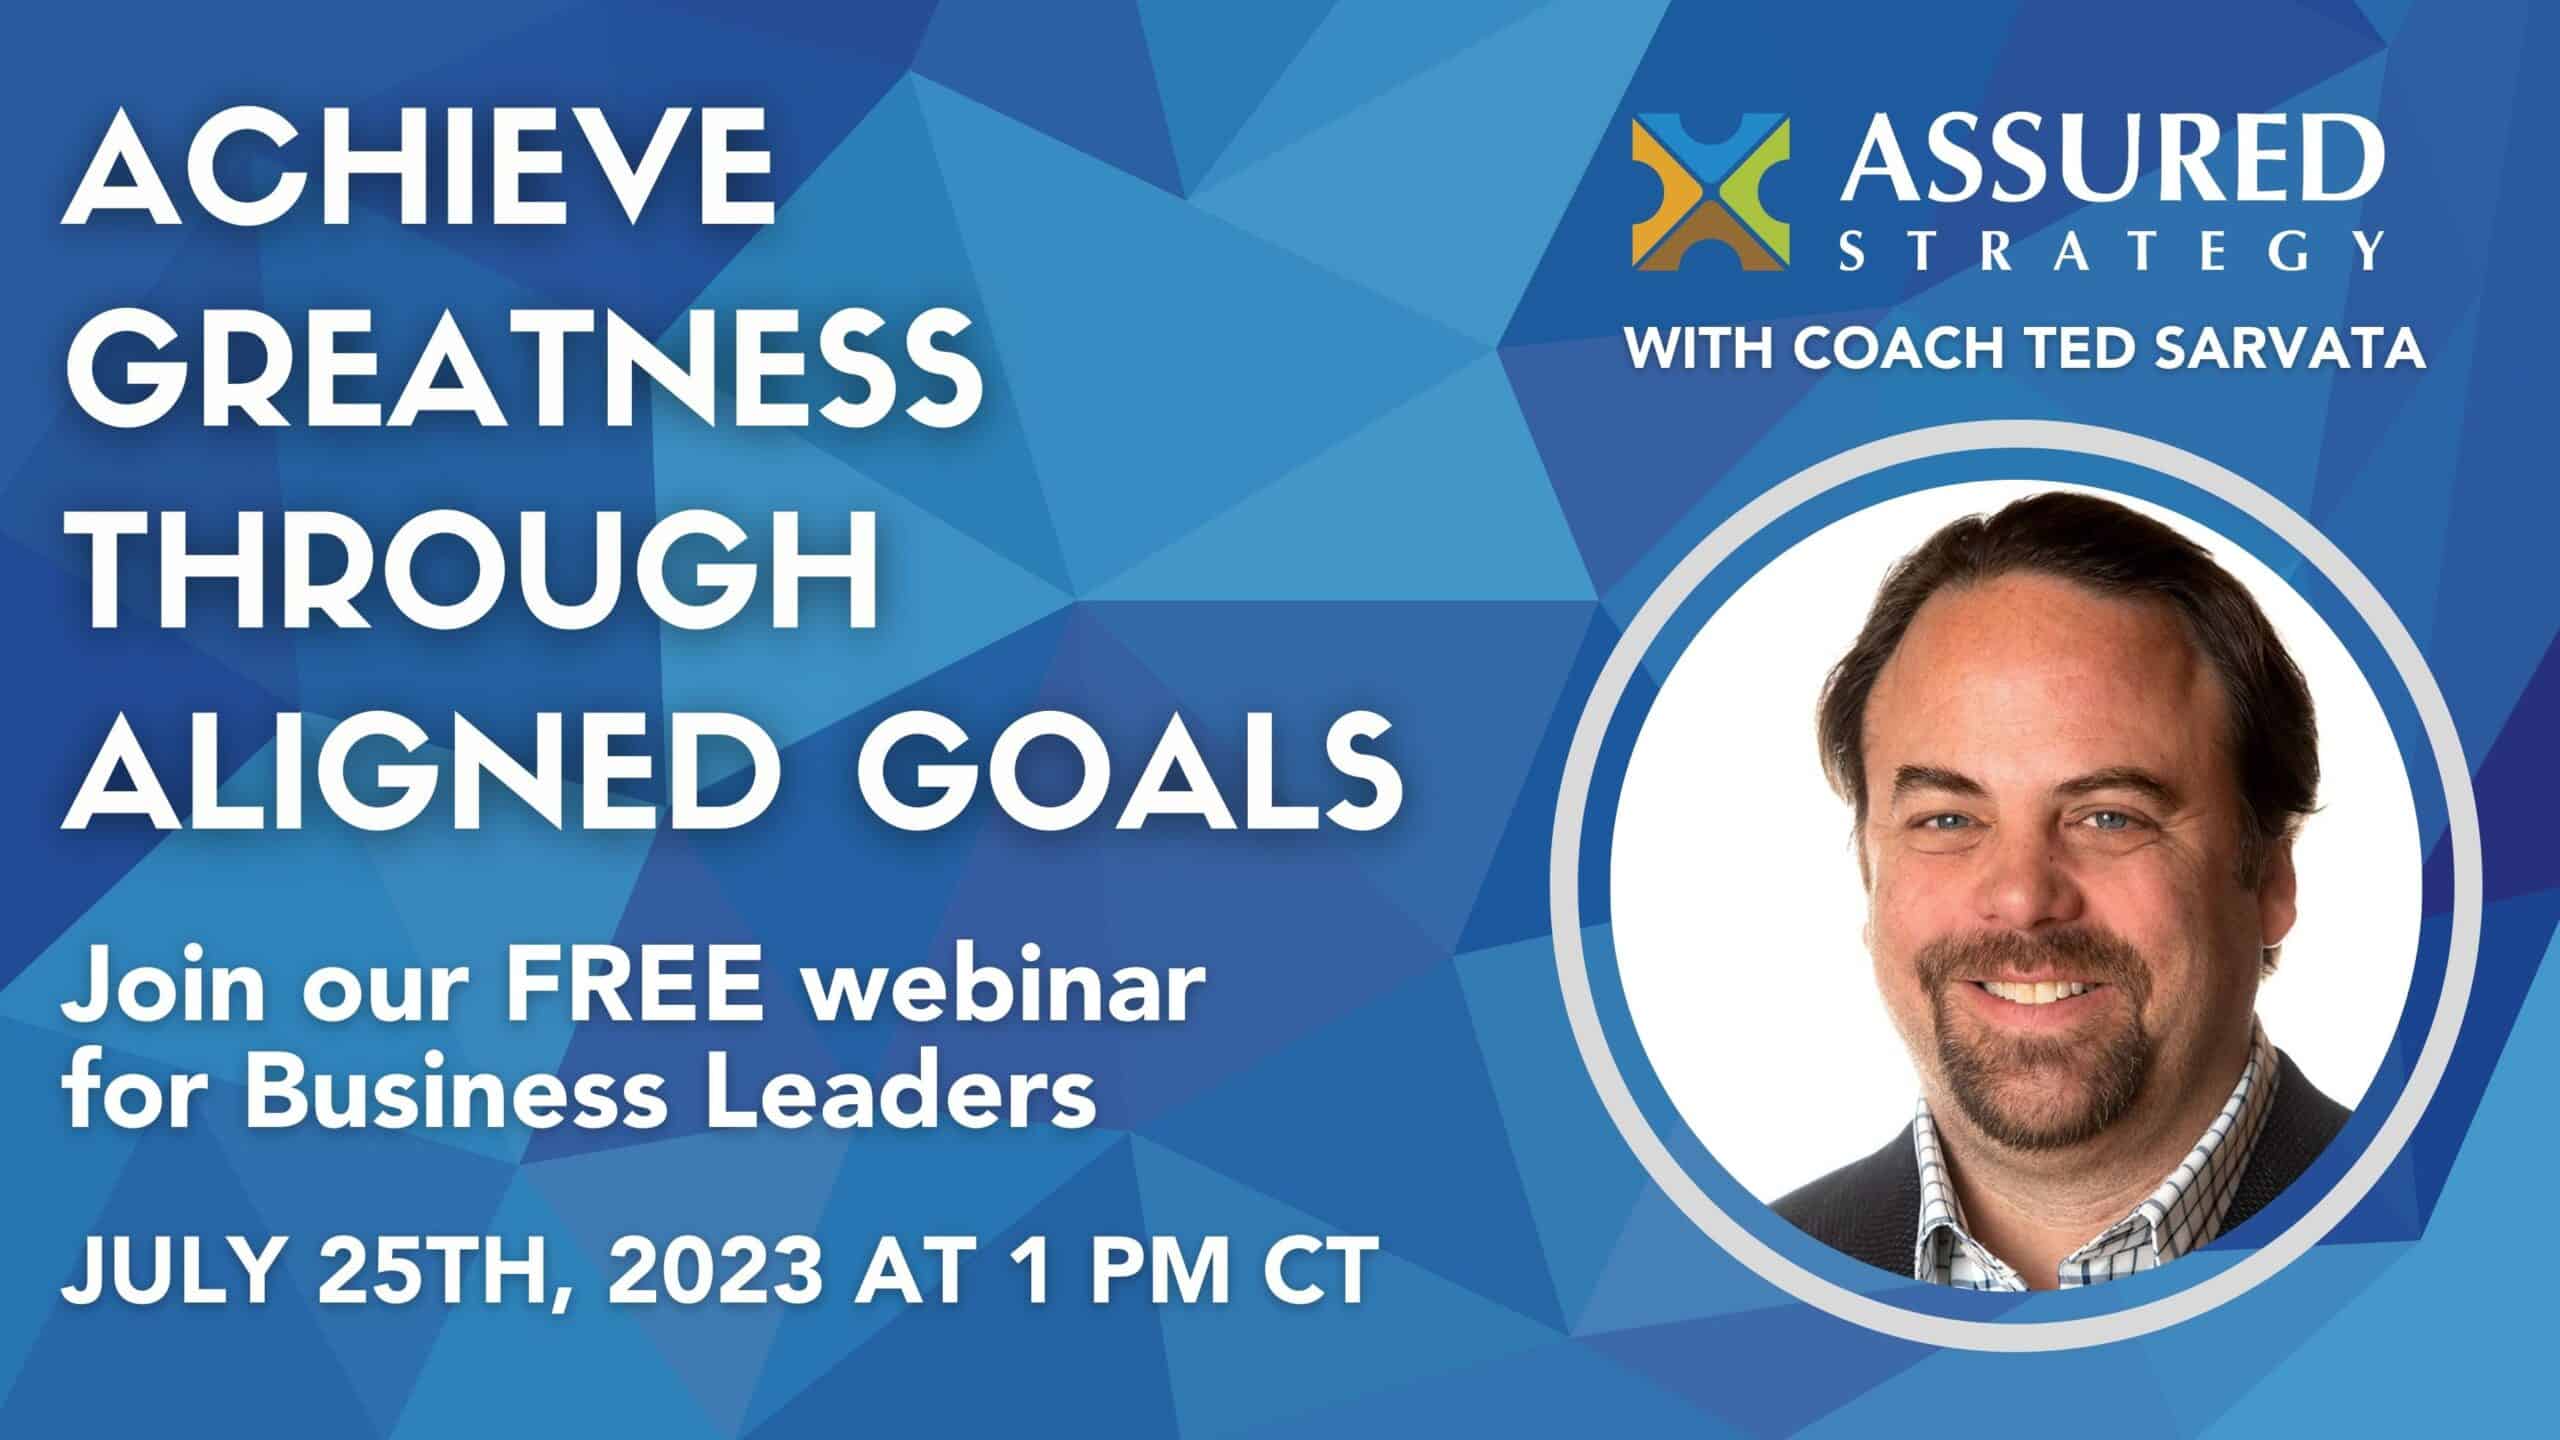 Free Webinar: Where Is Your Company Going? Values/Purpose/BHAG®  – July 25th from 1-2pm CT